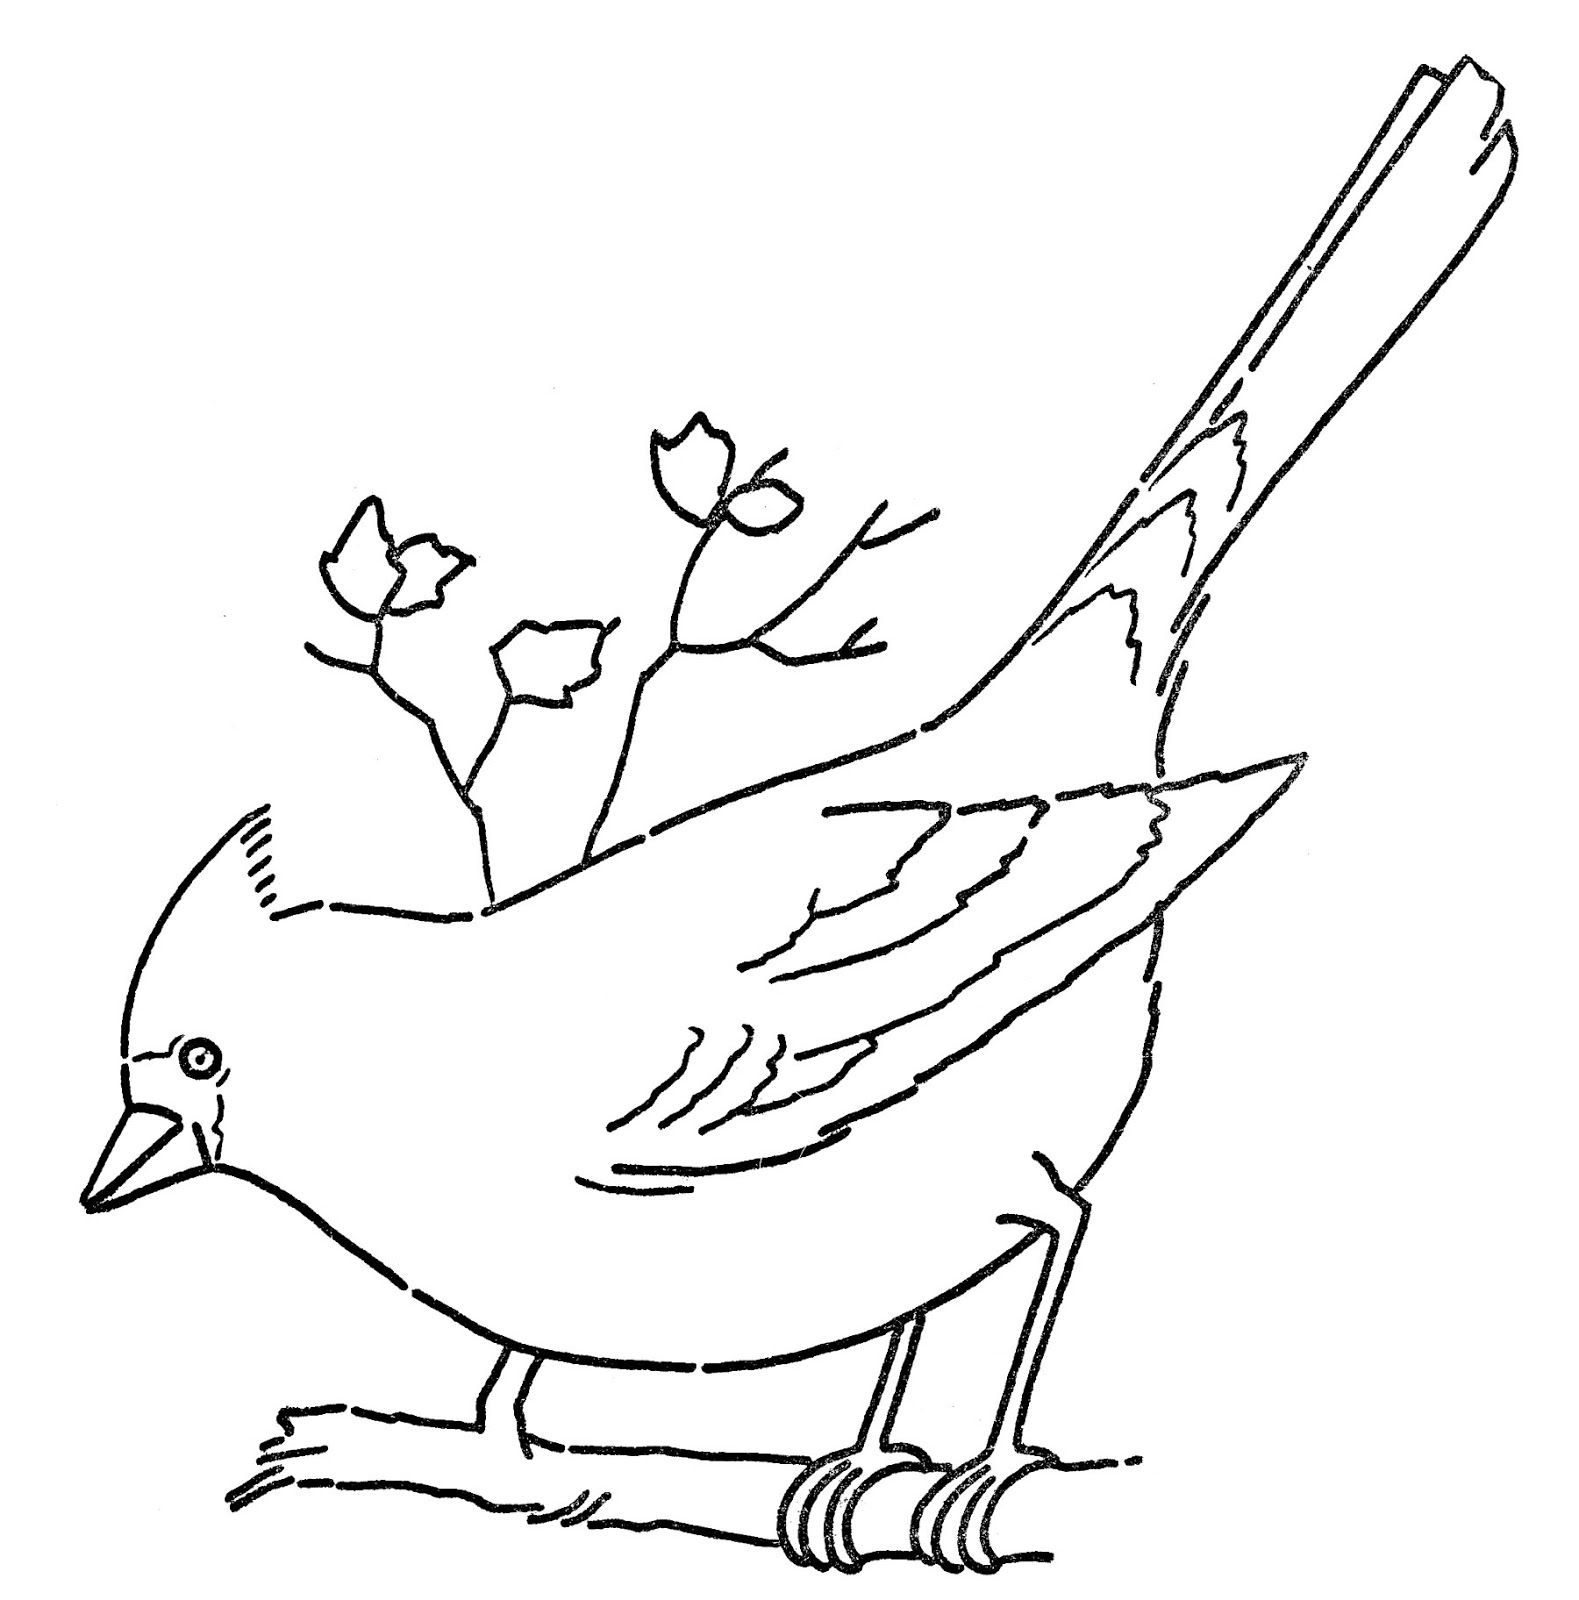 Free Line Drawings Of Animals, Download Free Line Drawings Of Animals